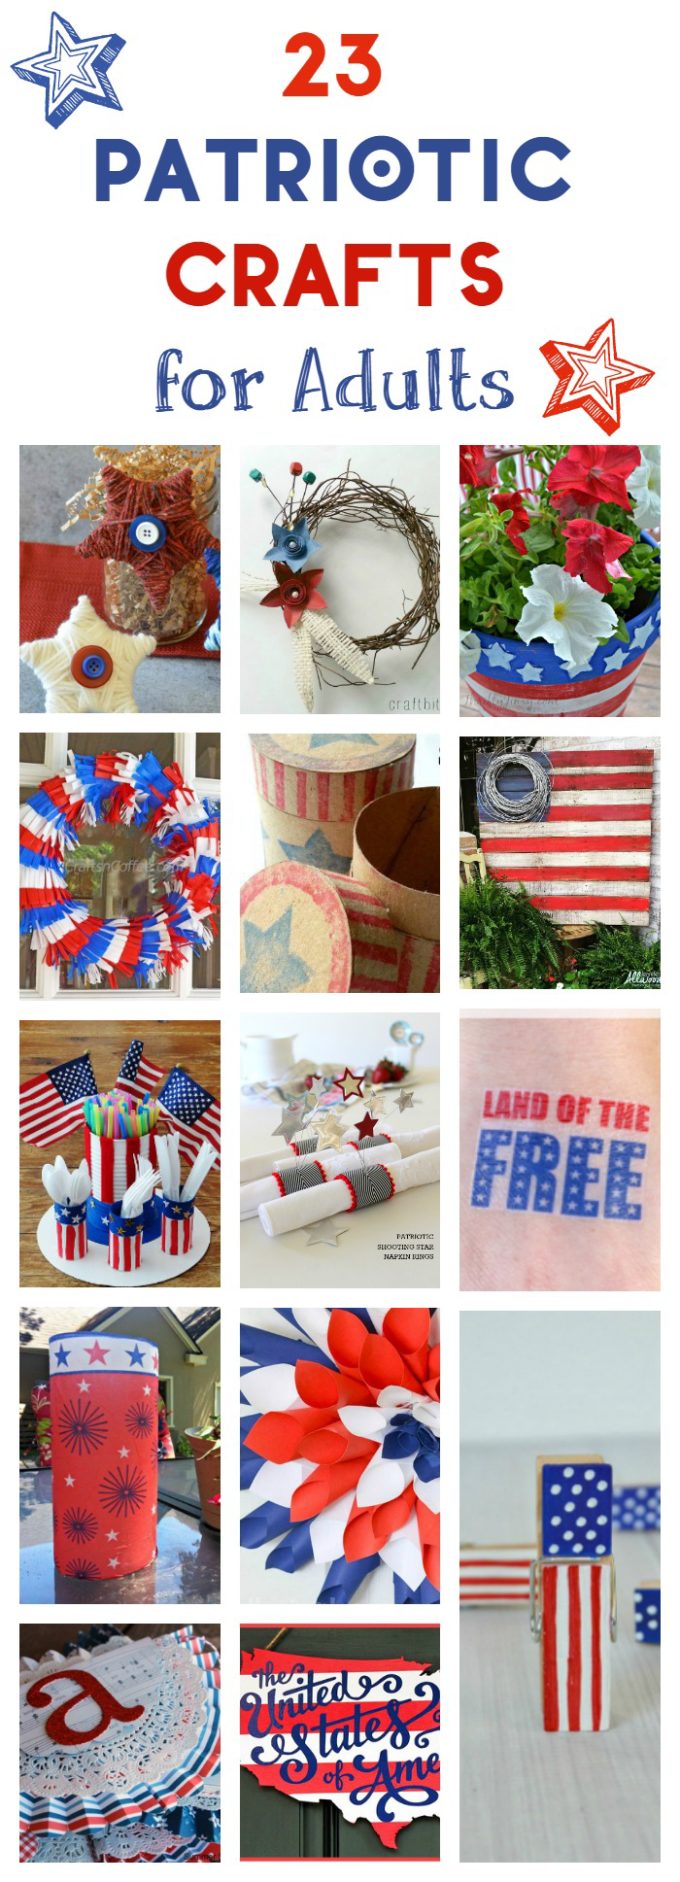 23 Charming Patriotic 4th of July Crafts That Make Fabulous Home Decor